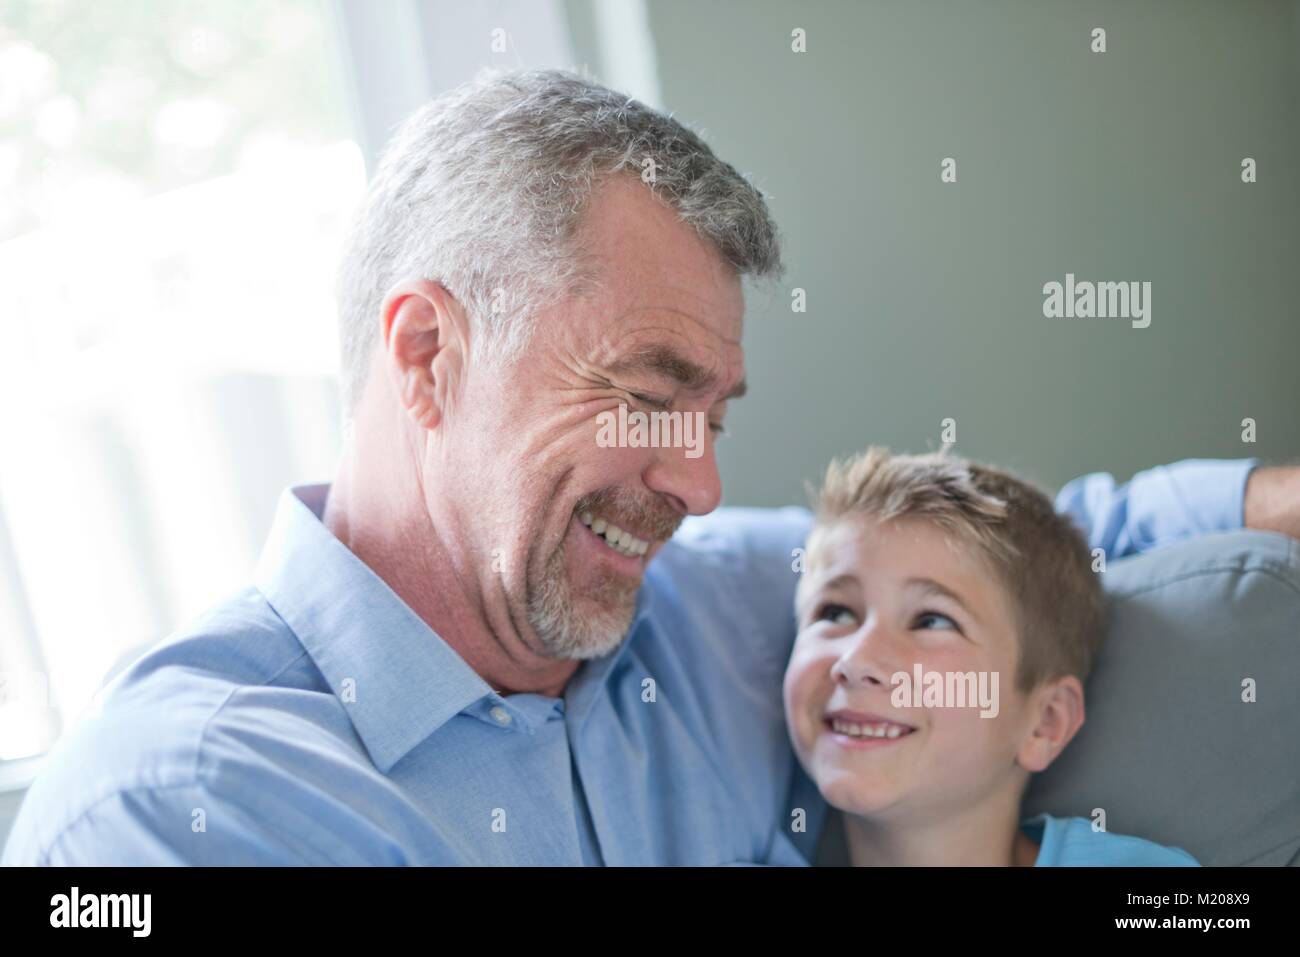 Portrait of grandfather and grandson smiling, face to face. Stock Photo